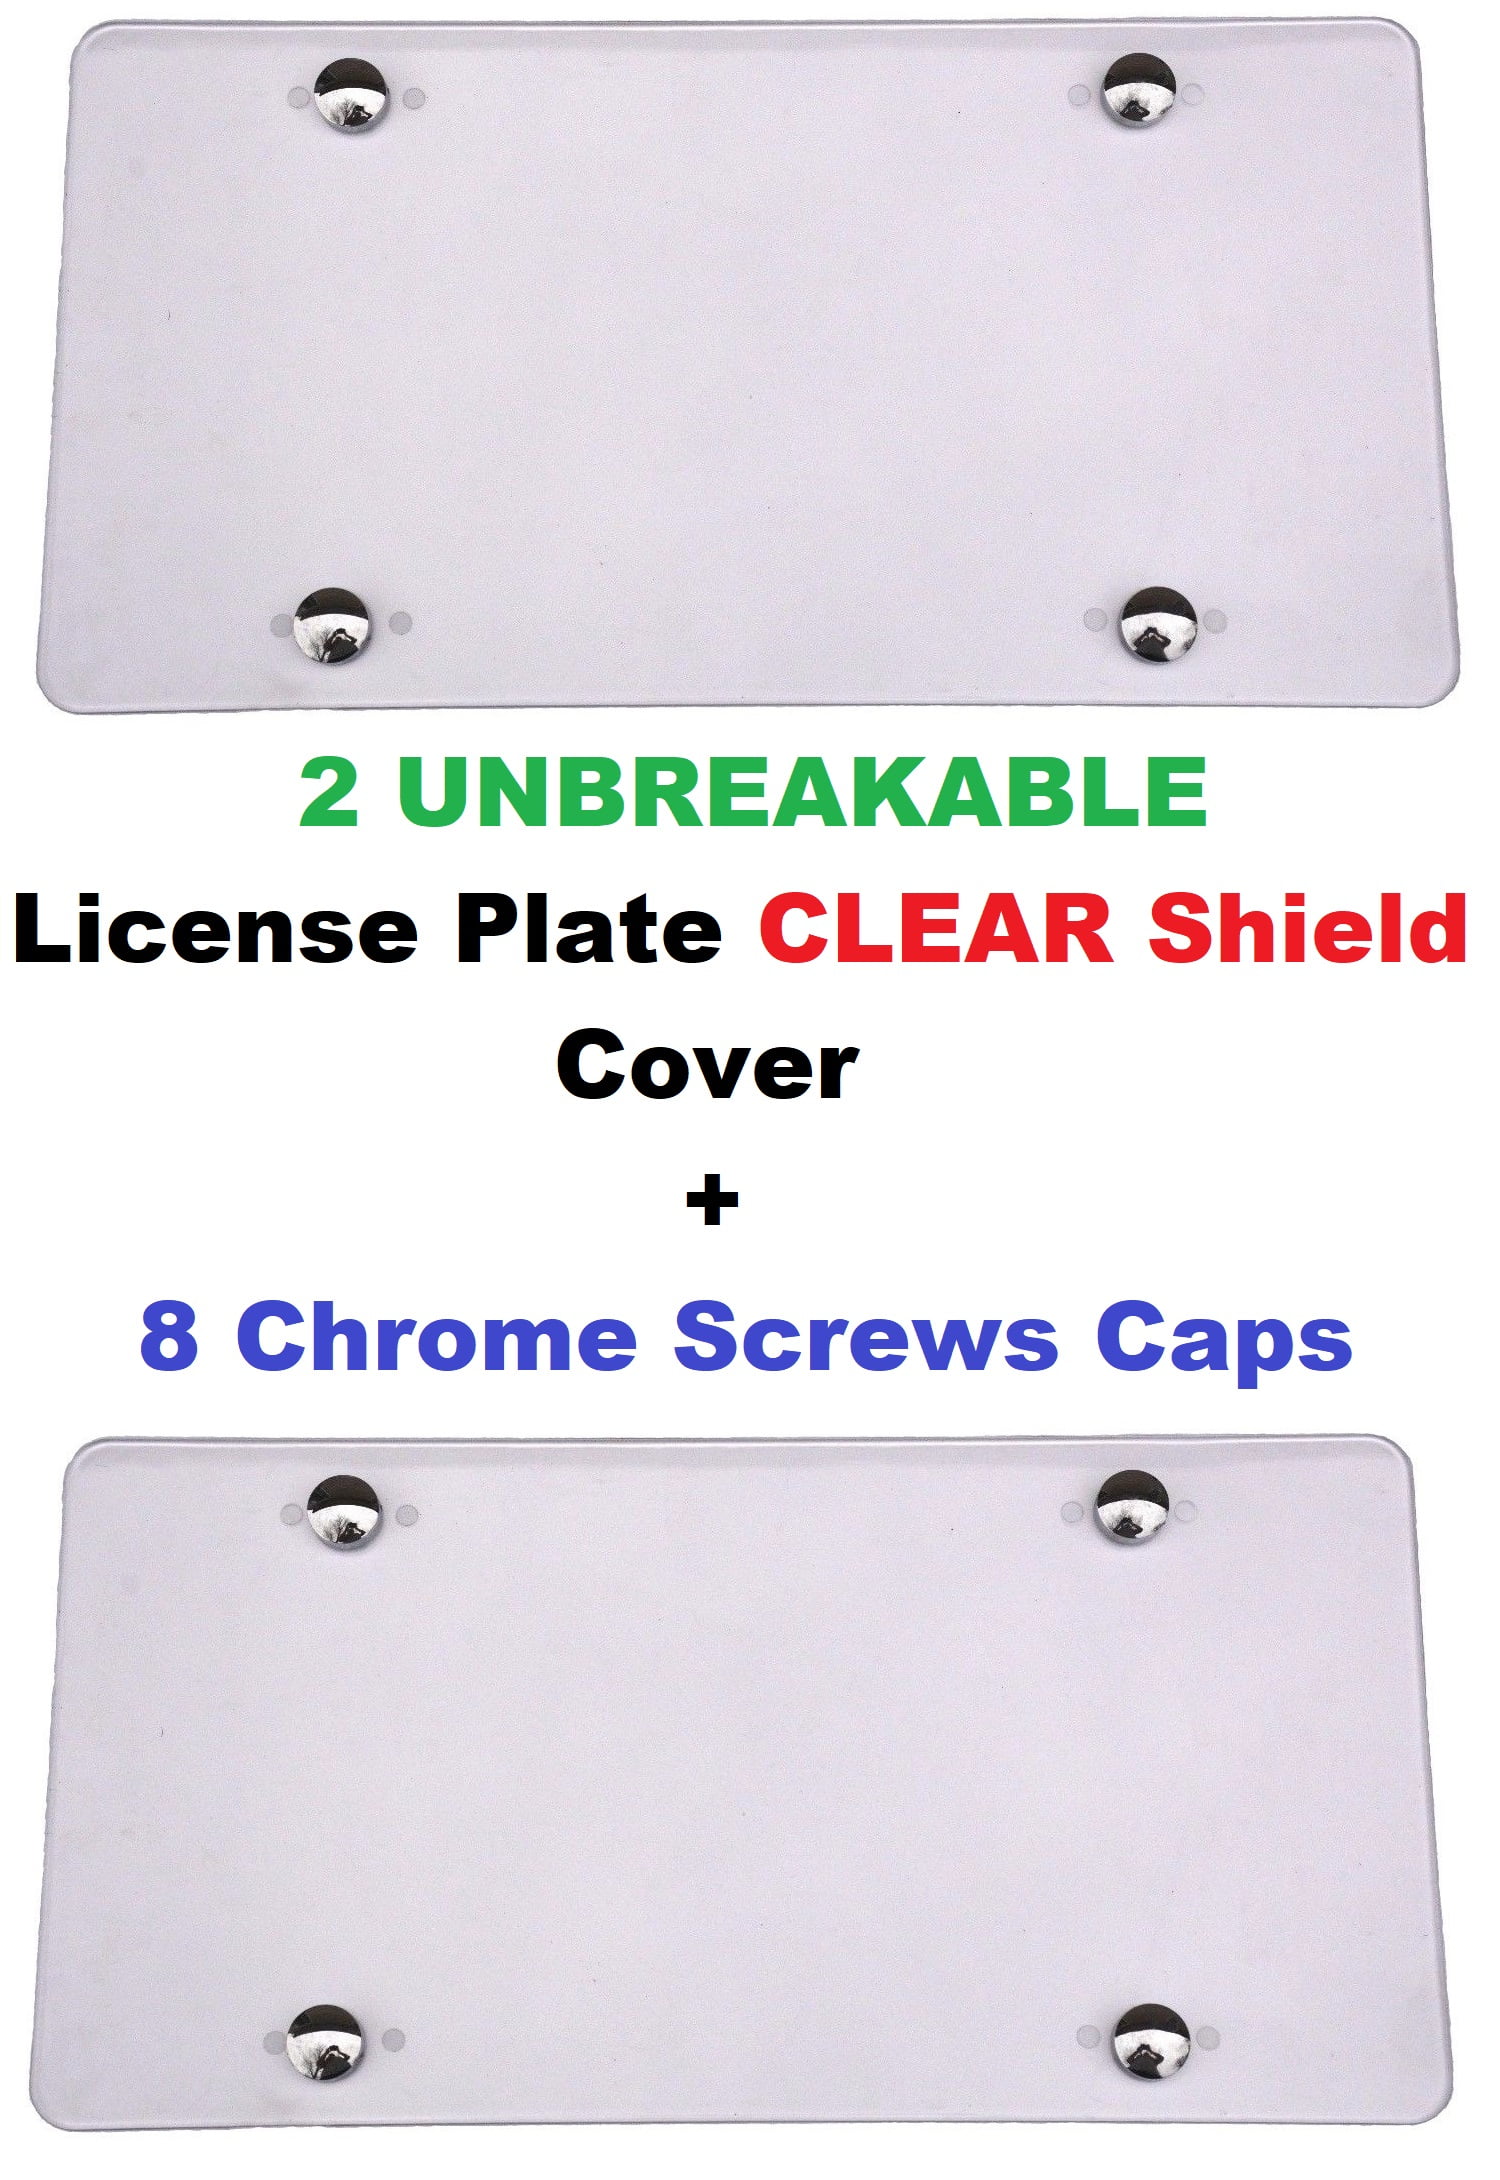 8 Screw Caps for Cars New 2 Clear License Plate Shield Covers 